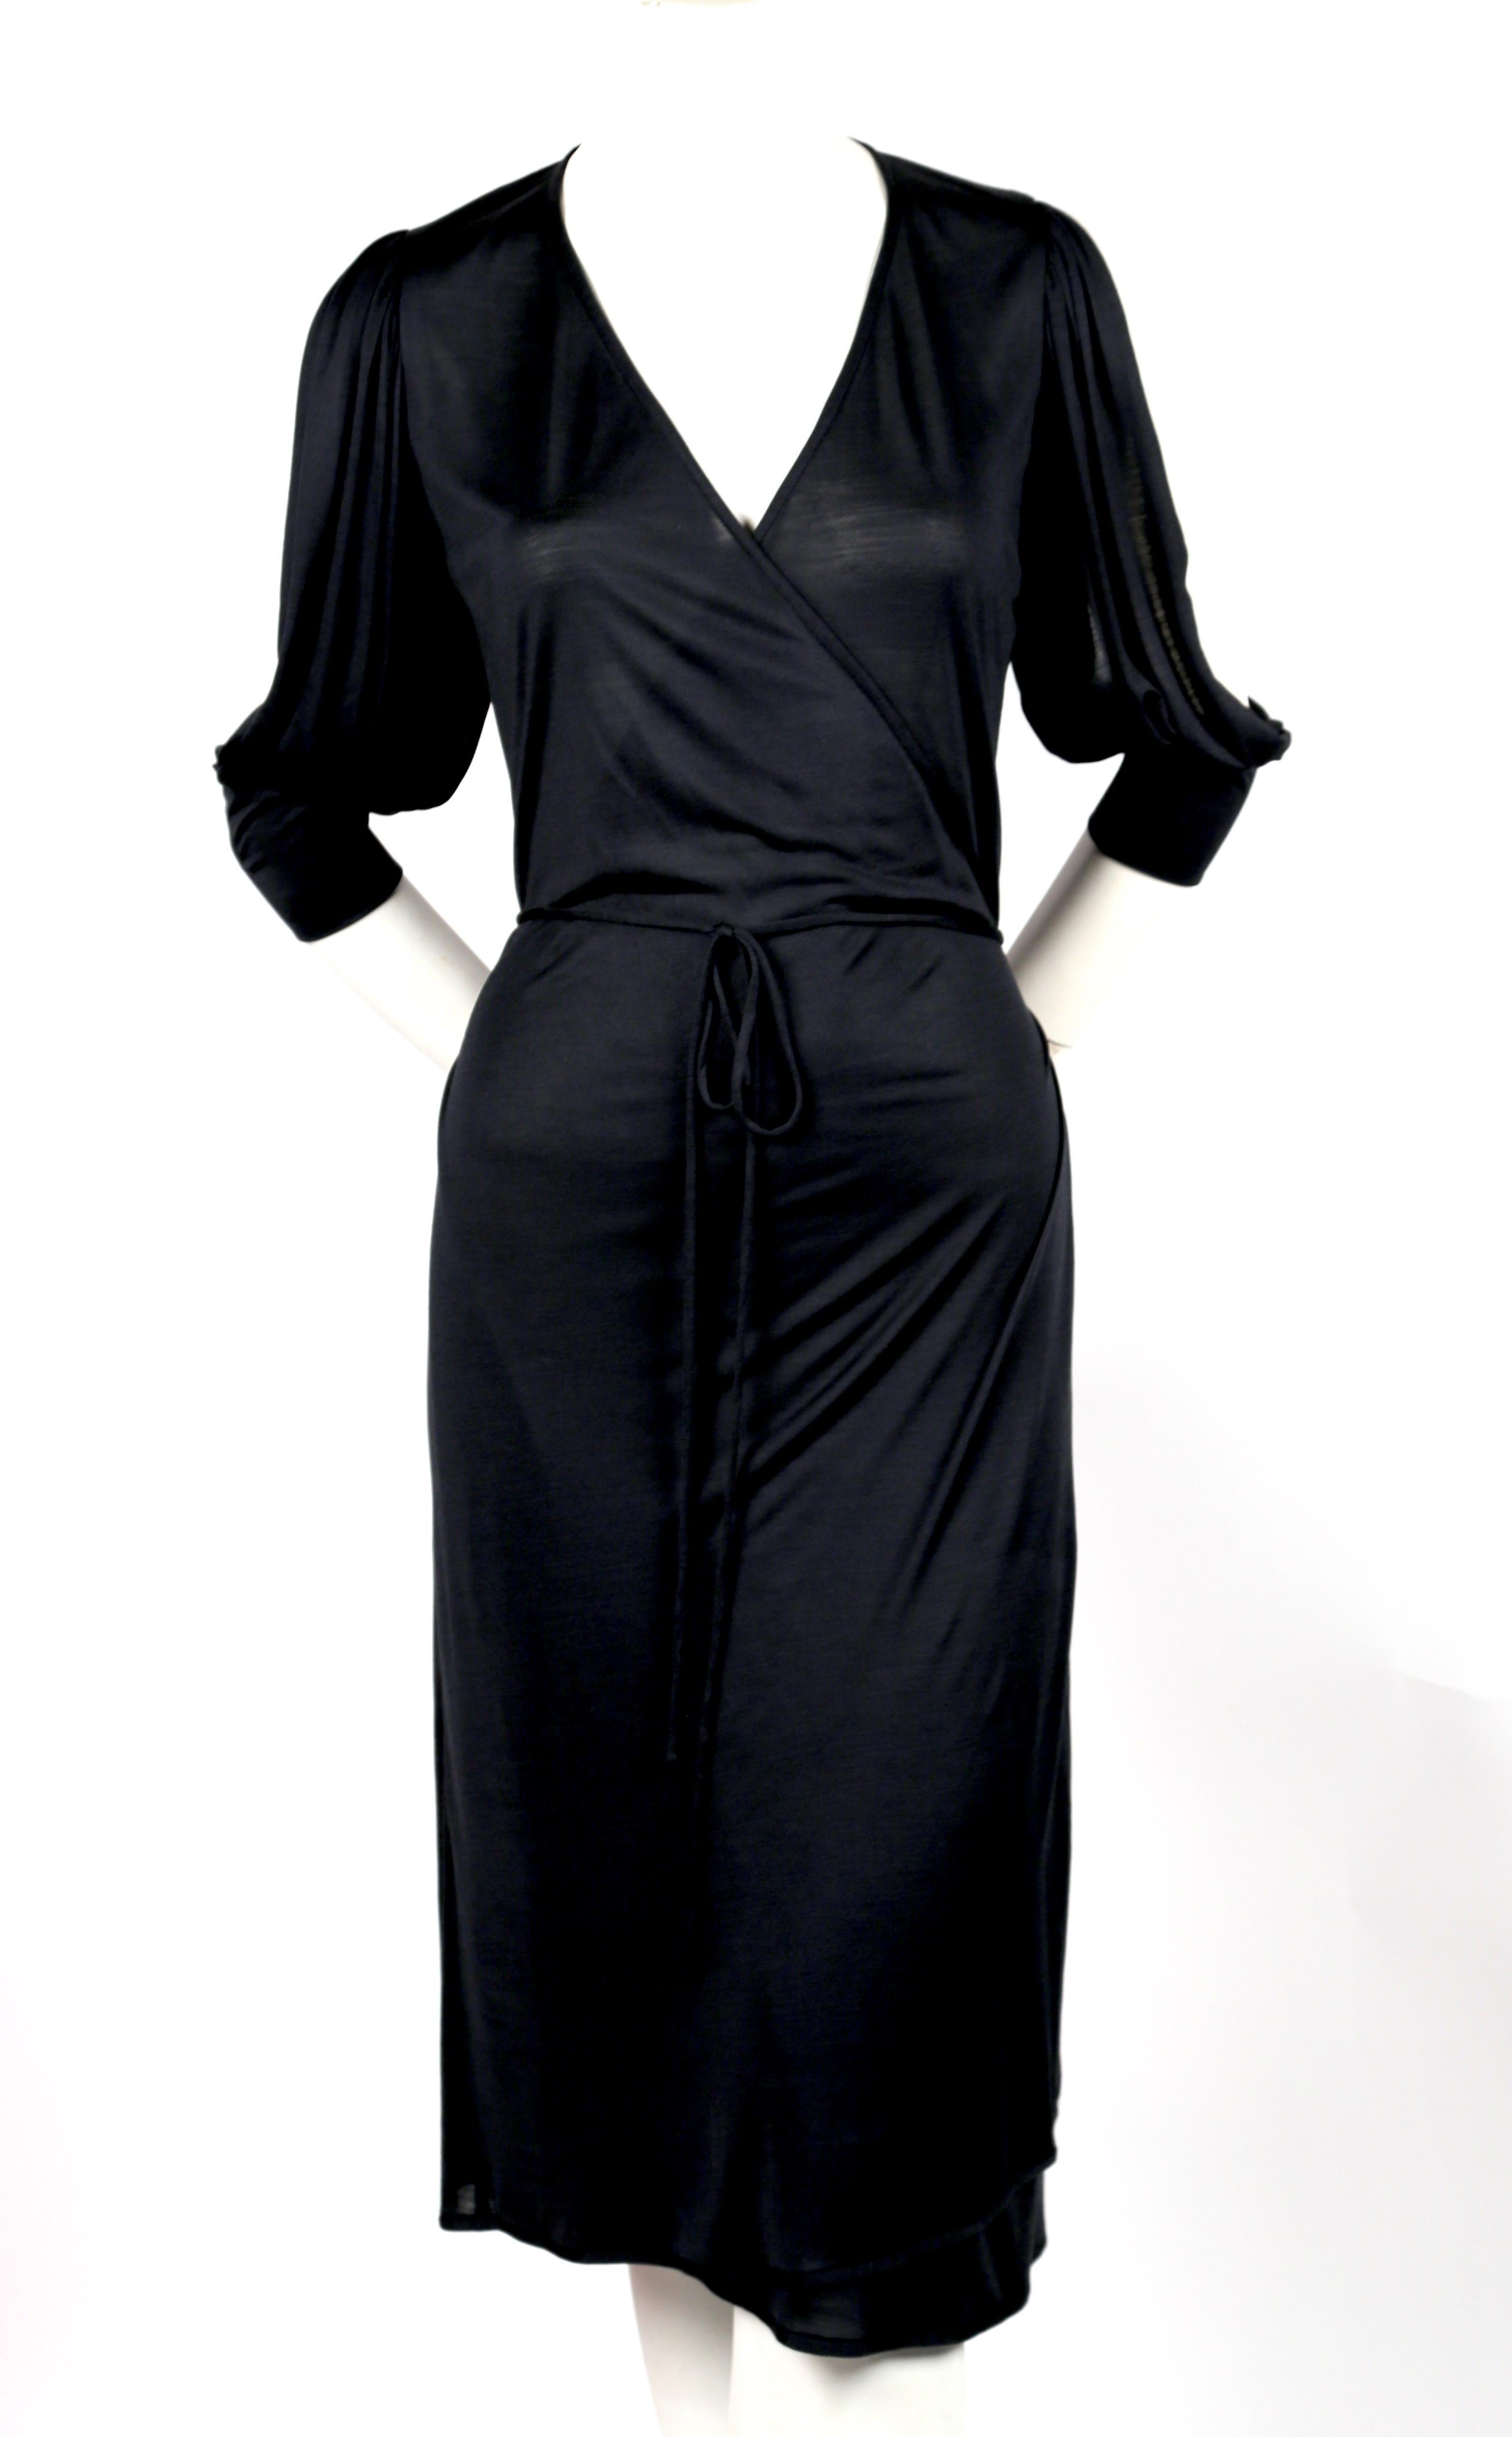 Inky black jersey, wrap dress designed by Nicolas Ghesquiere for Balenciaga dating to spring of 2000. French size 36. Bust waist and hips are adjustable due to wrap closure however this best fits a French size 36. Approximate measurements: shoulder